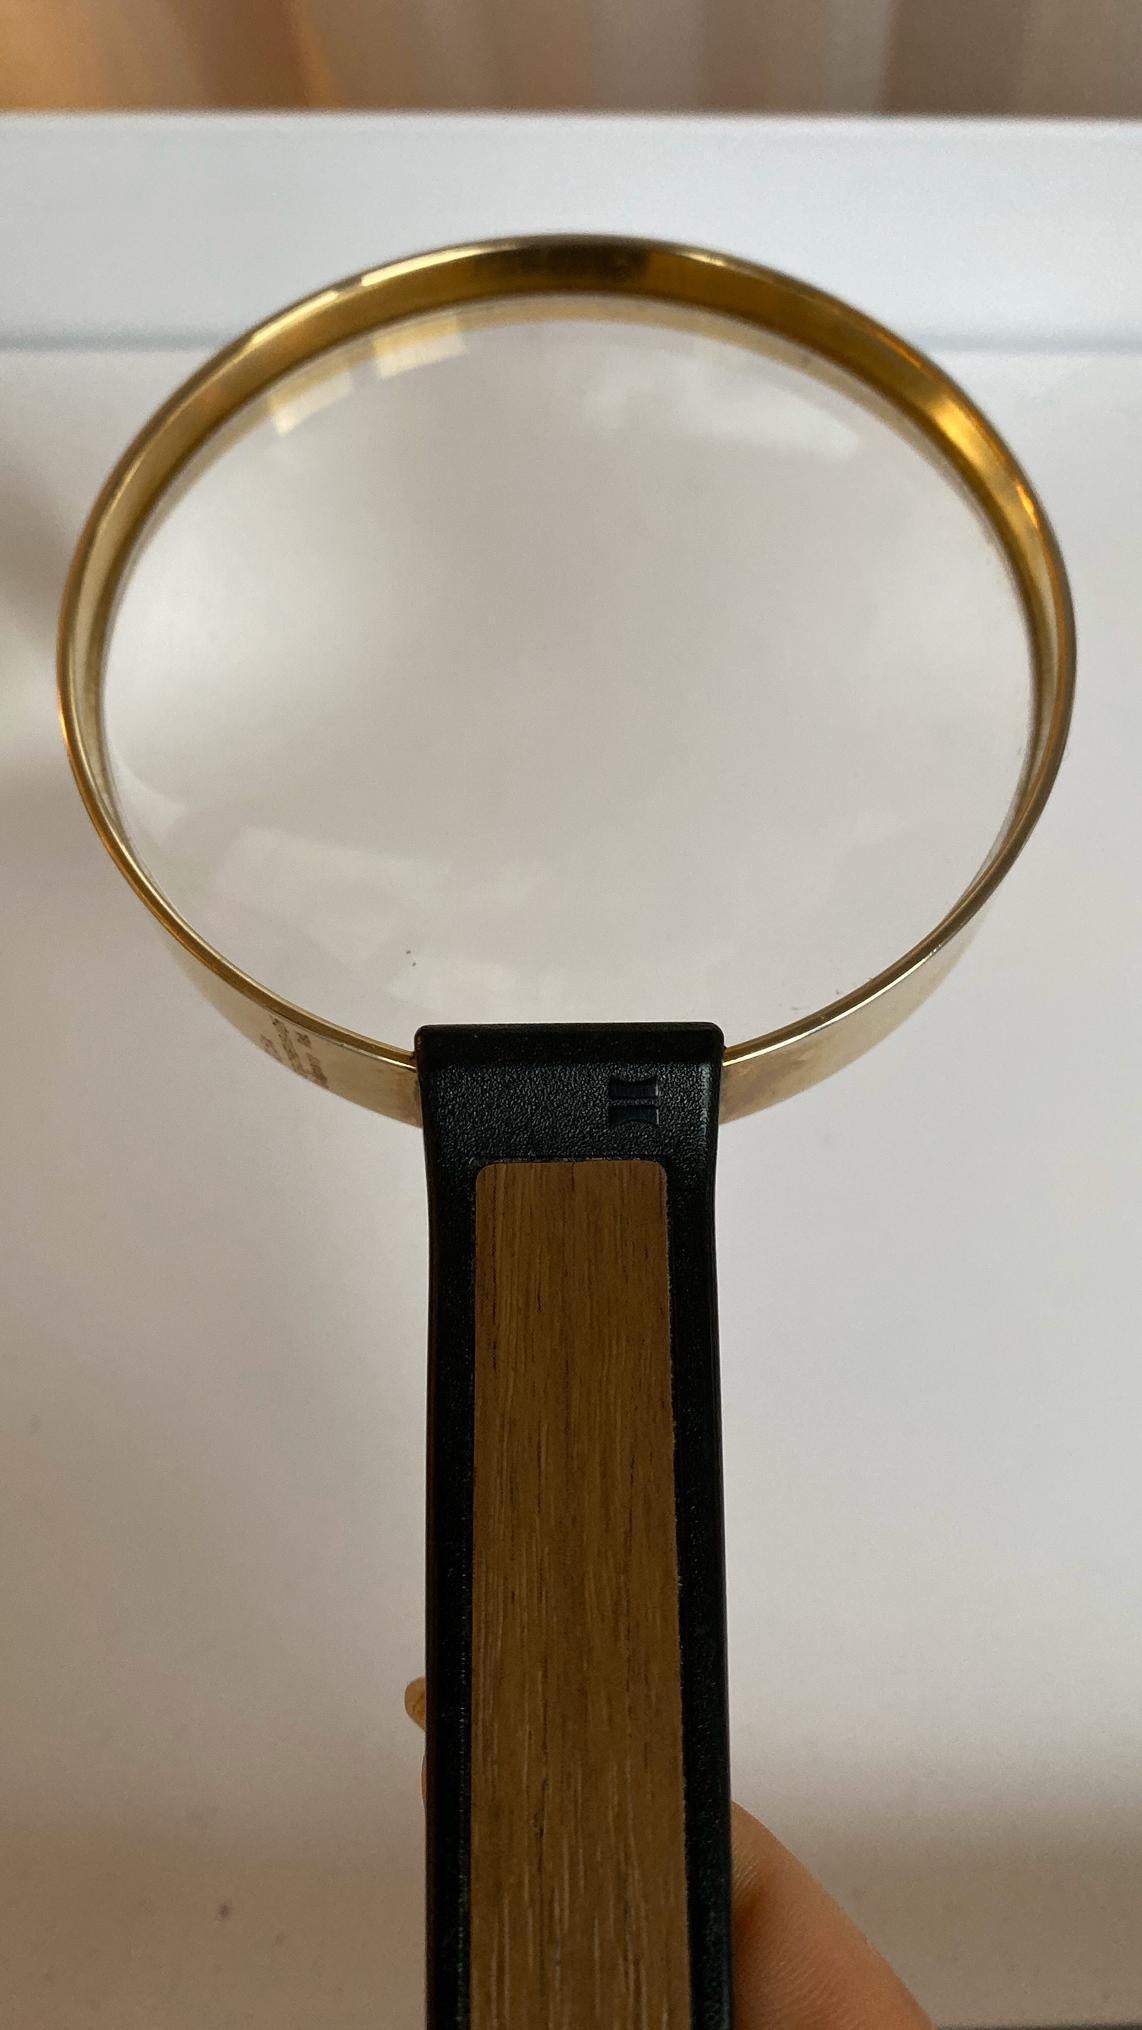 Mid-Century Modern Eschenbach Optic Very High Quality Gold Hand Magnifier Made in Germany 